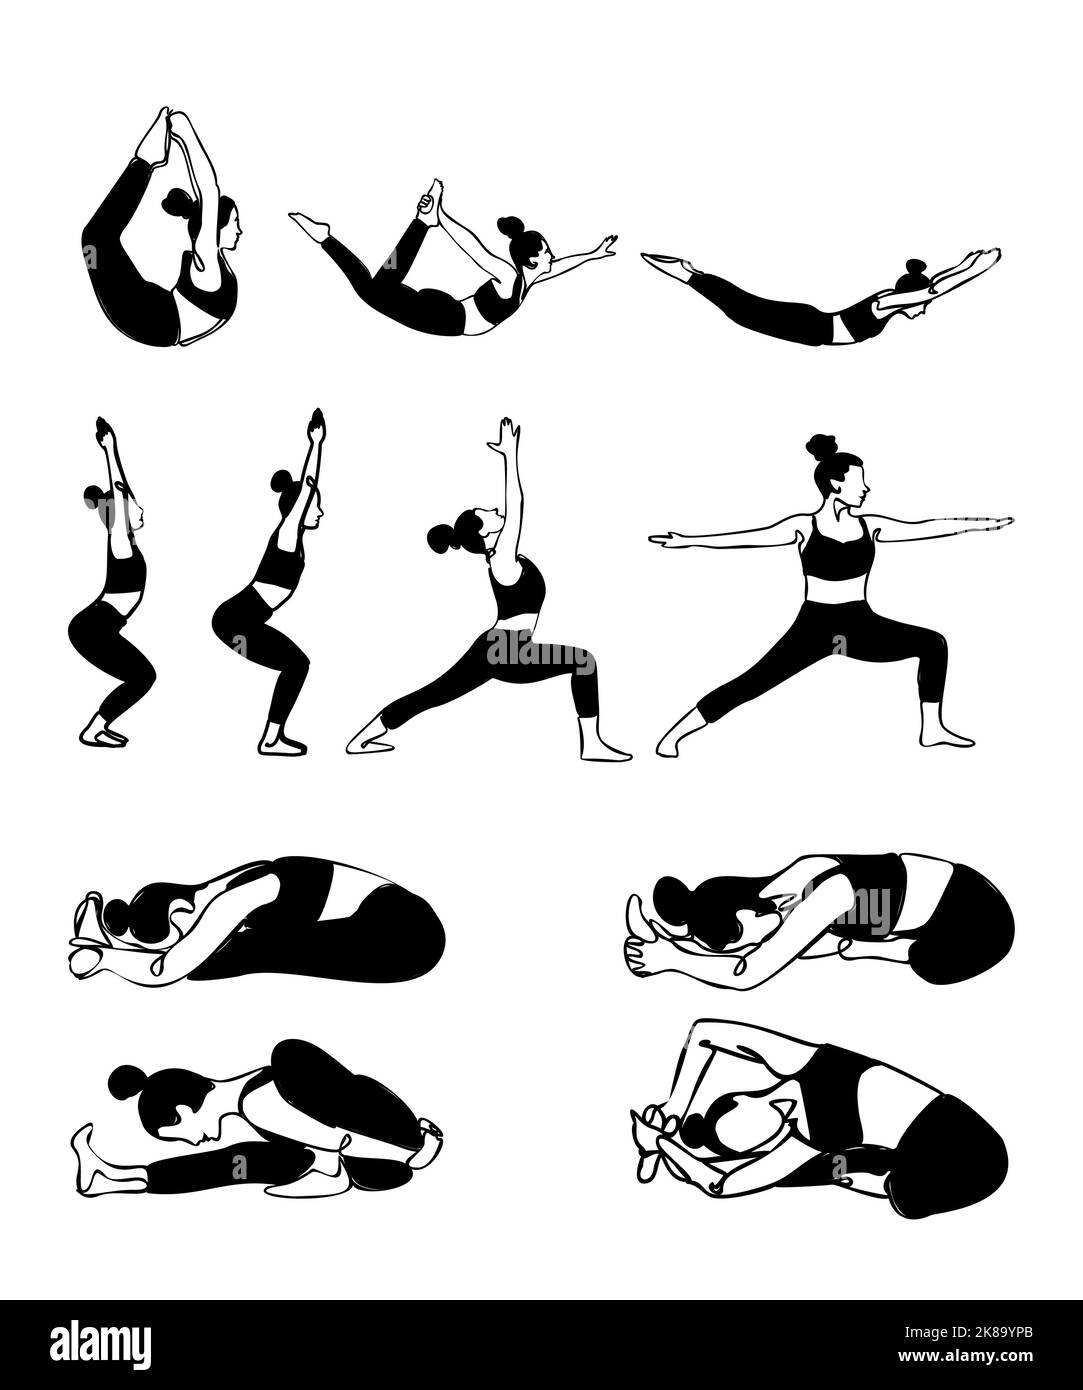 Yoga Poses Collection Set Black Icons Isolated on White Background Stock Vector